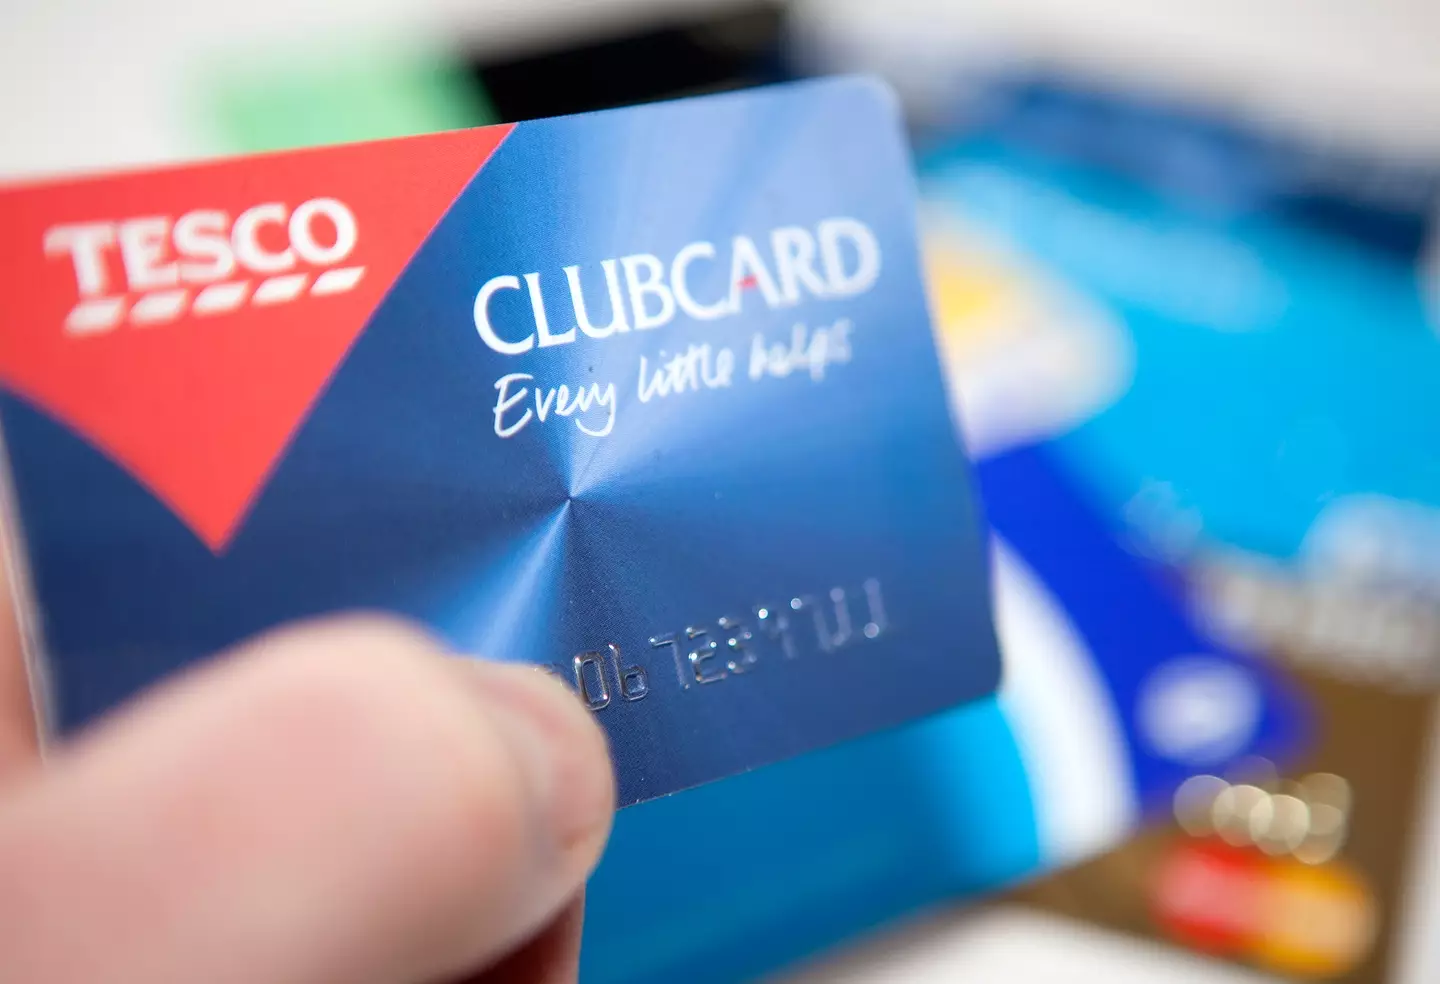 Clubcard holders can bag free pints thanks to Tesco's partnership with BrewDog.